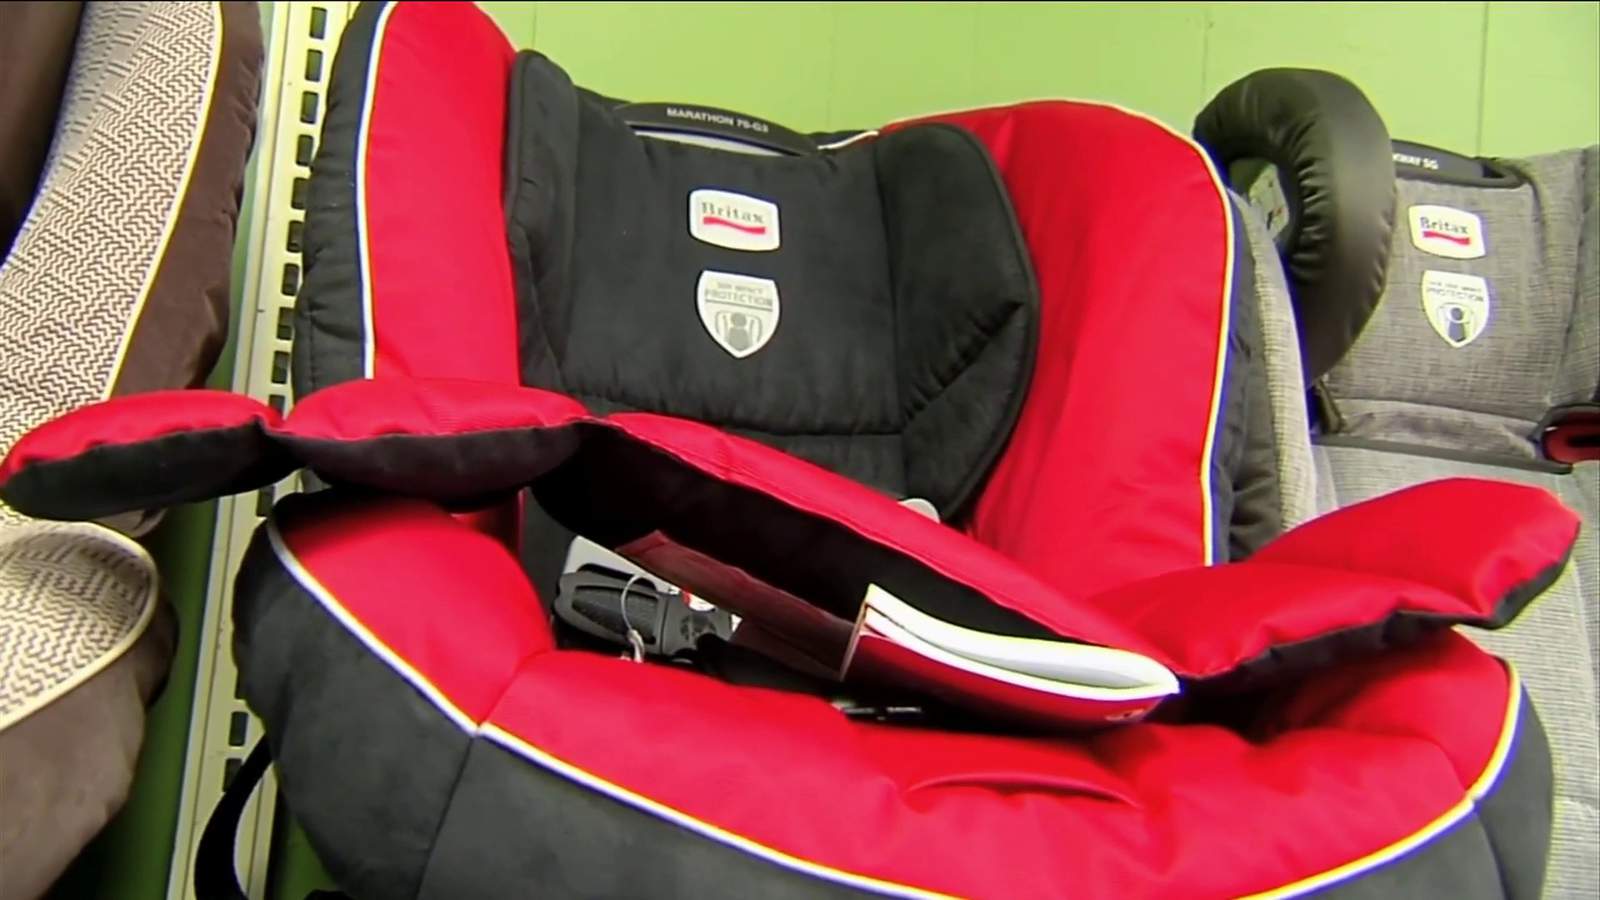 Bill aims to raise Florida’s car seat age to 6